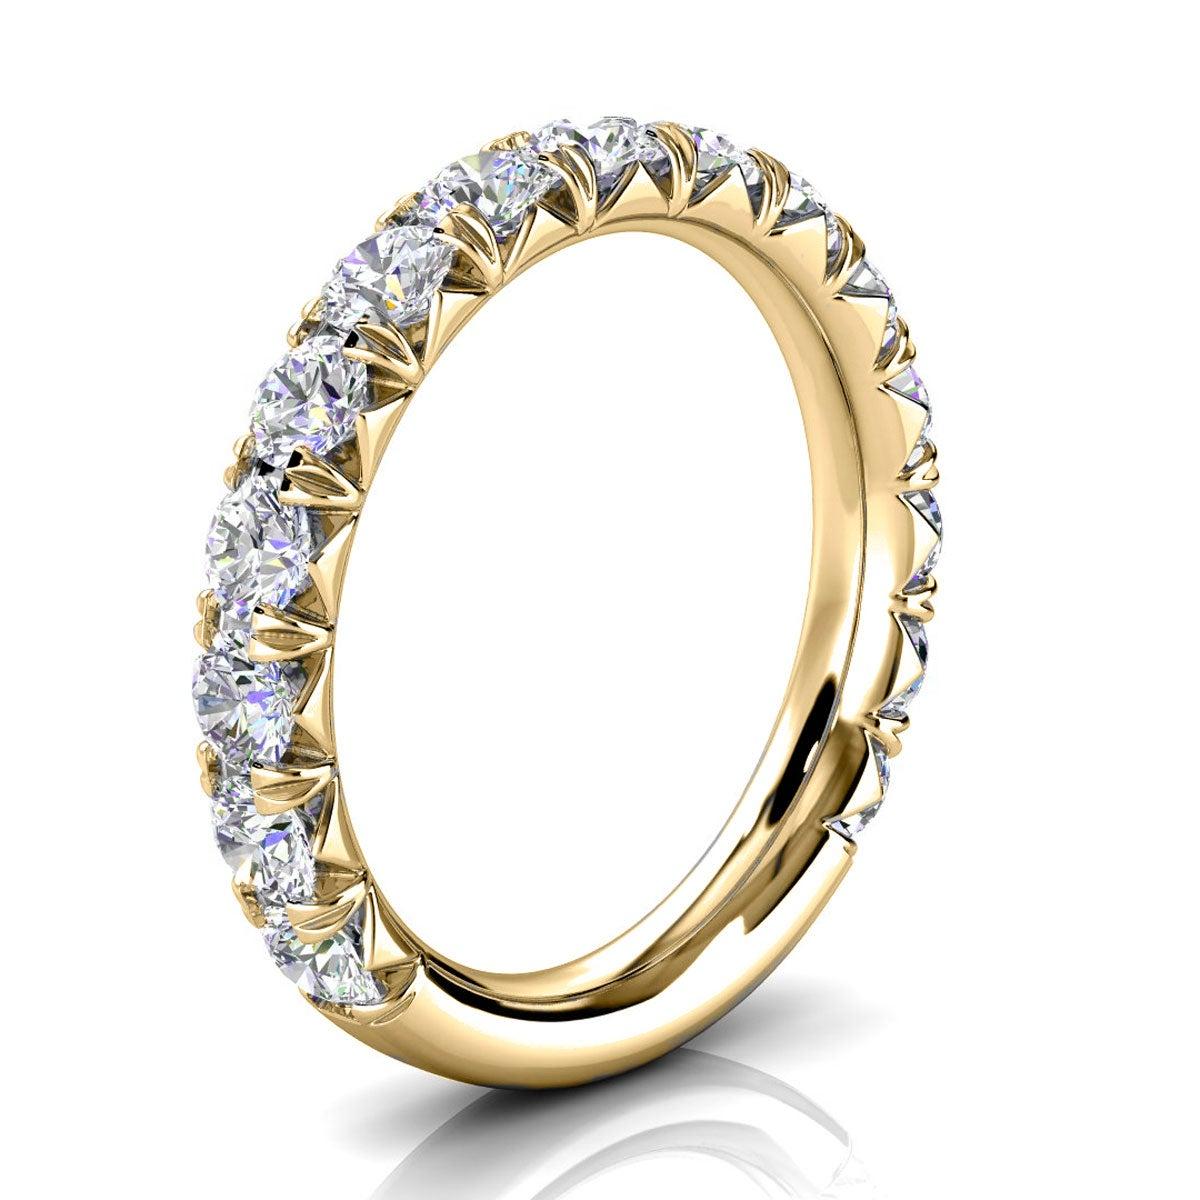 For Sale:  14k Yellow Gold GIA French Pave Diamond Ring '1 1/2 Ct. Tw' 2